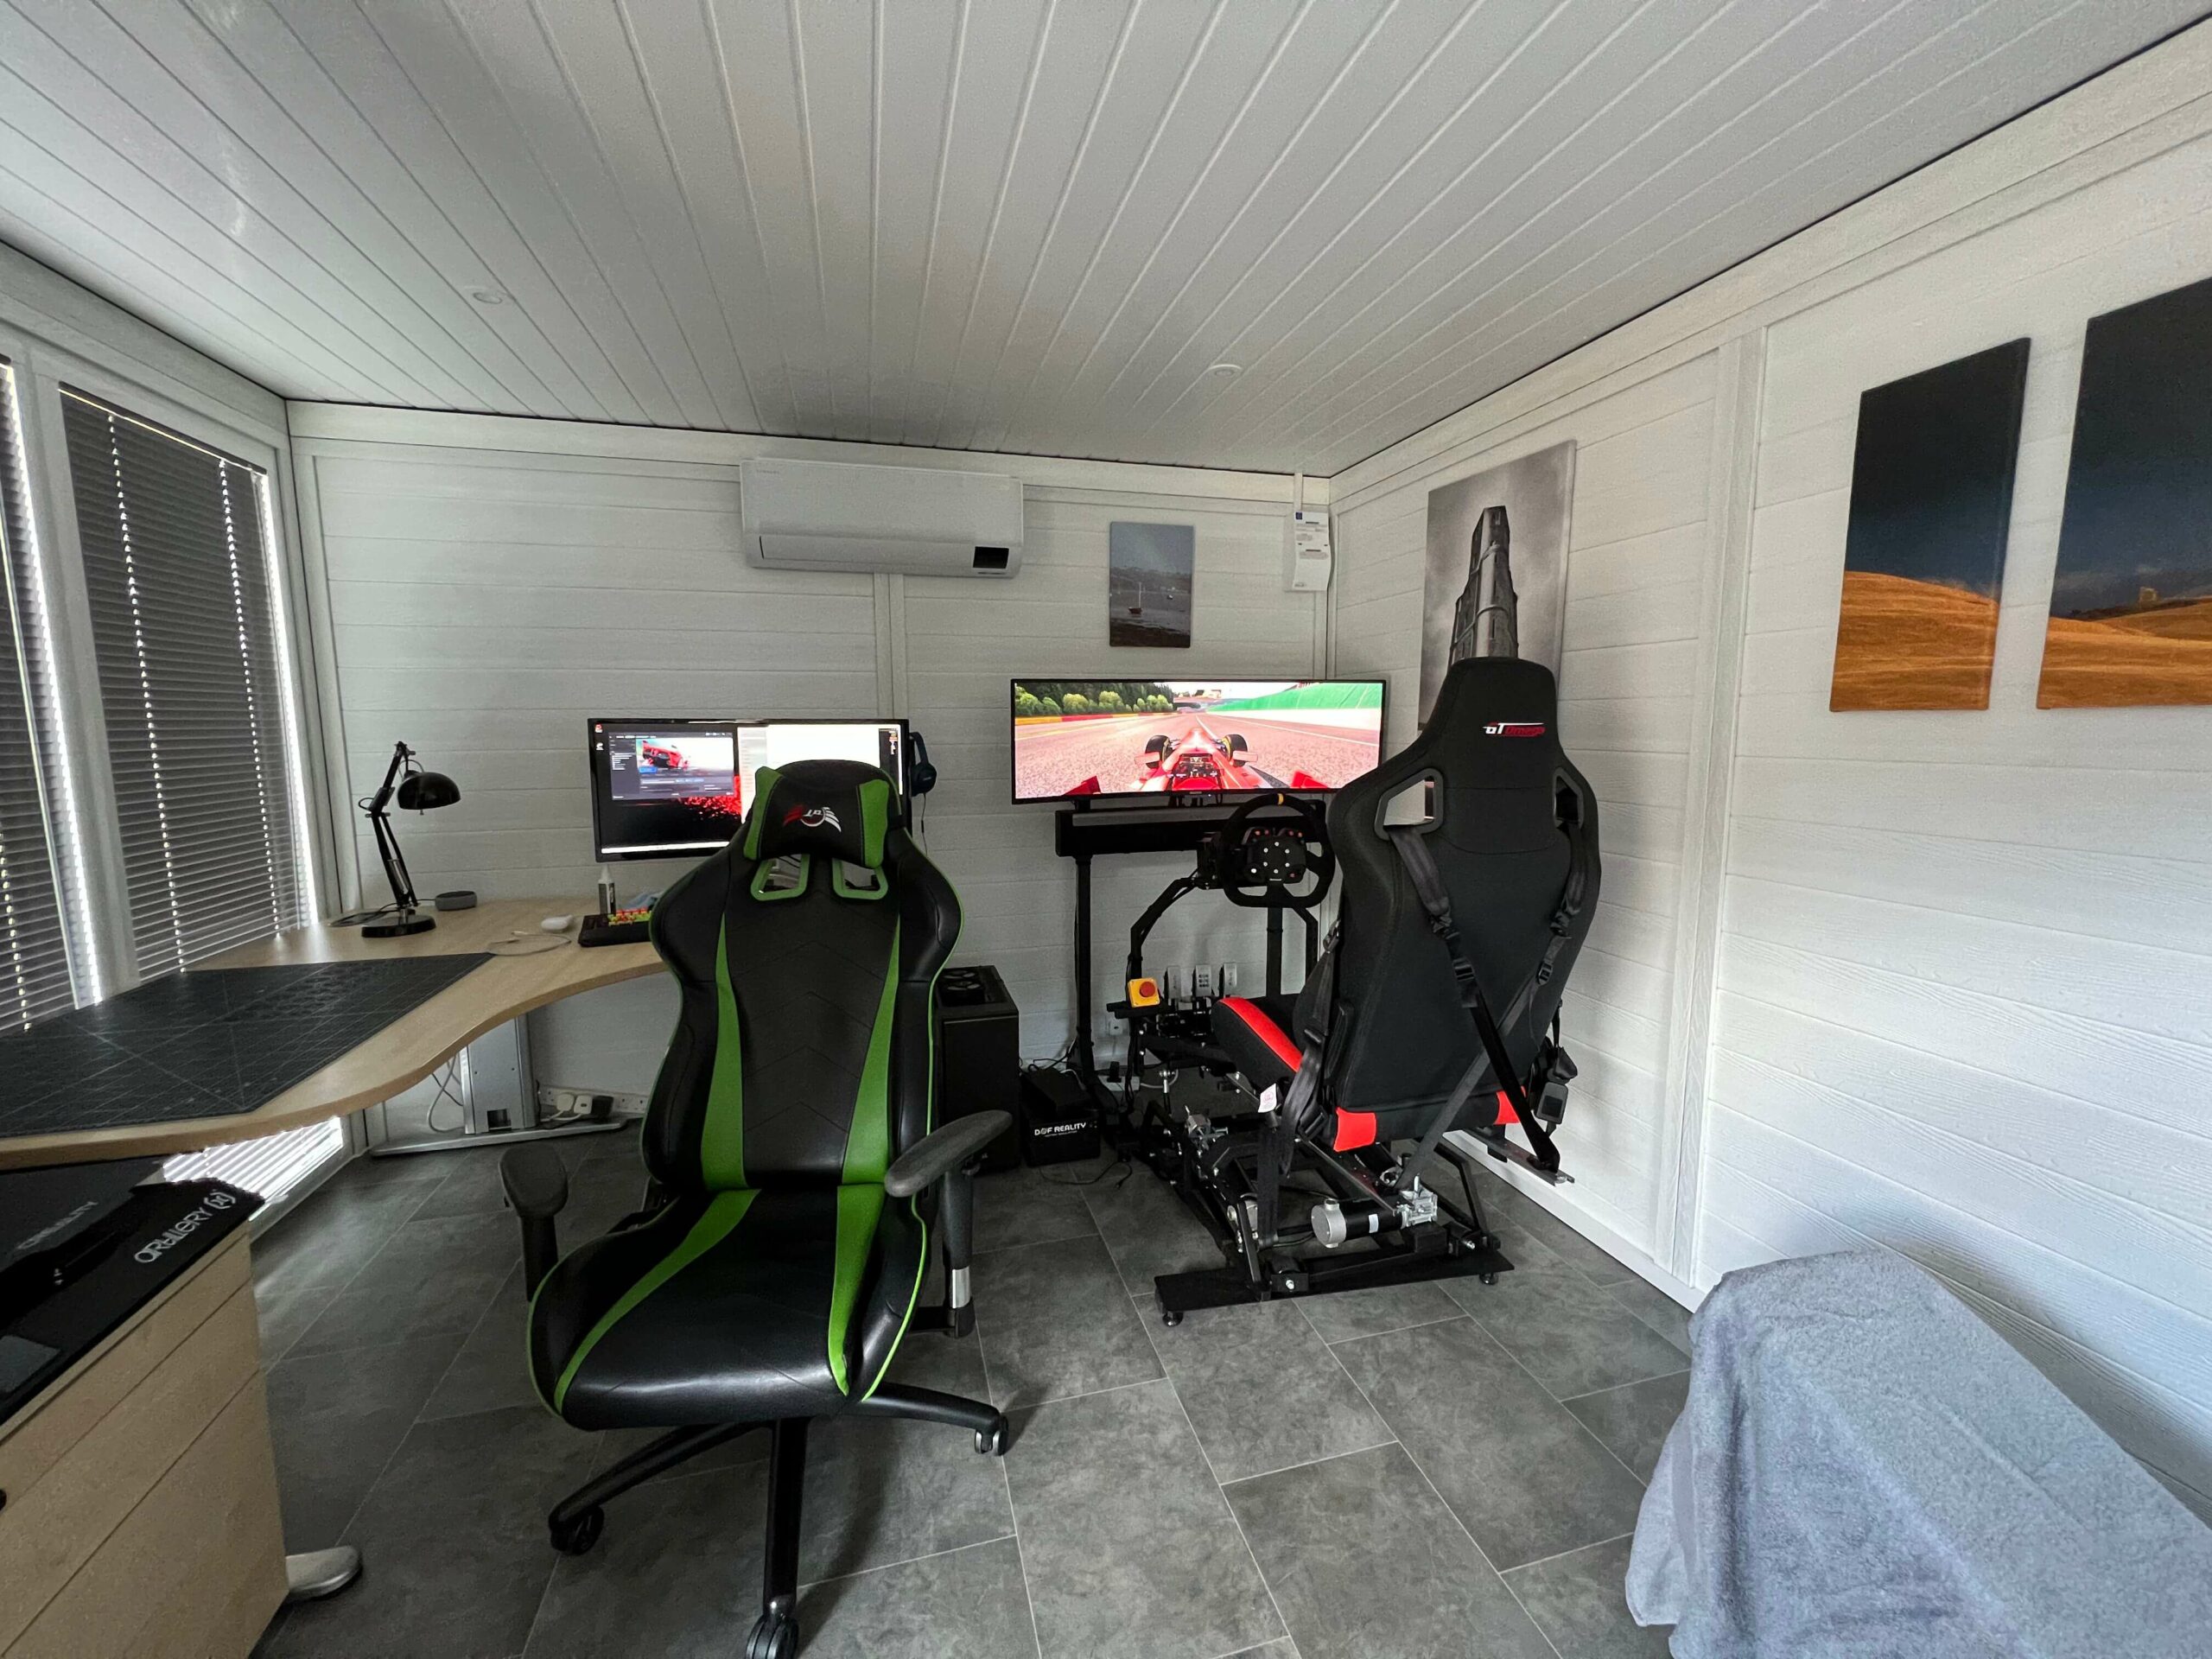 Garden gaming room and office